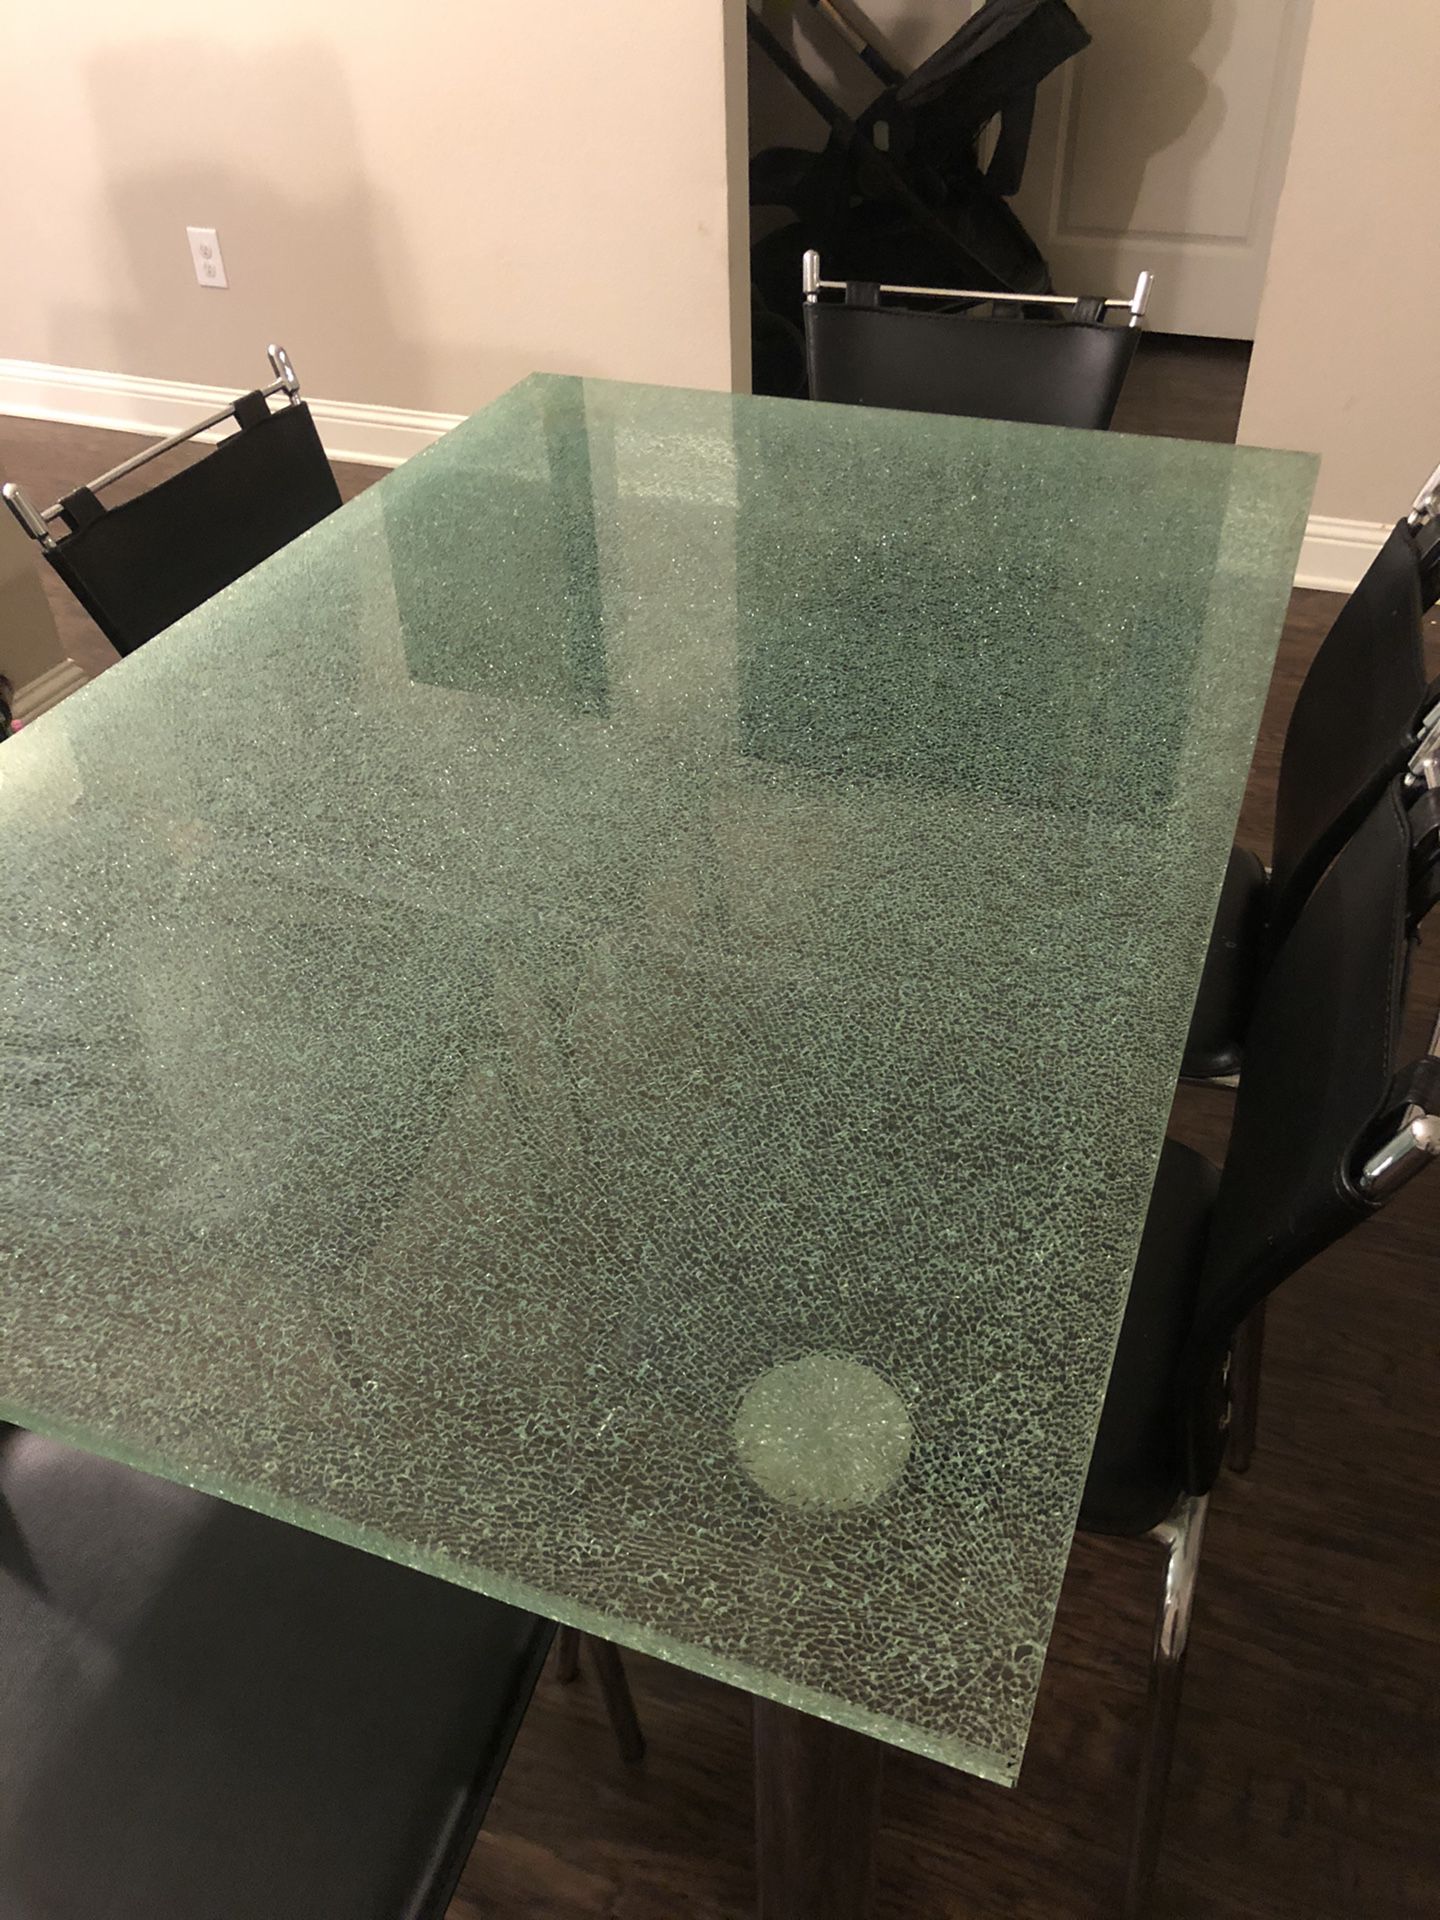 MODERN GLASS TABLE comes with the 6 chairs